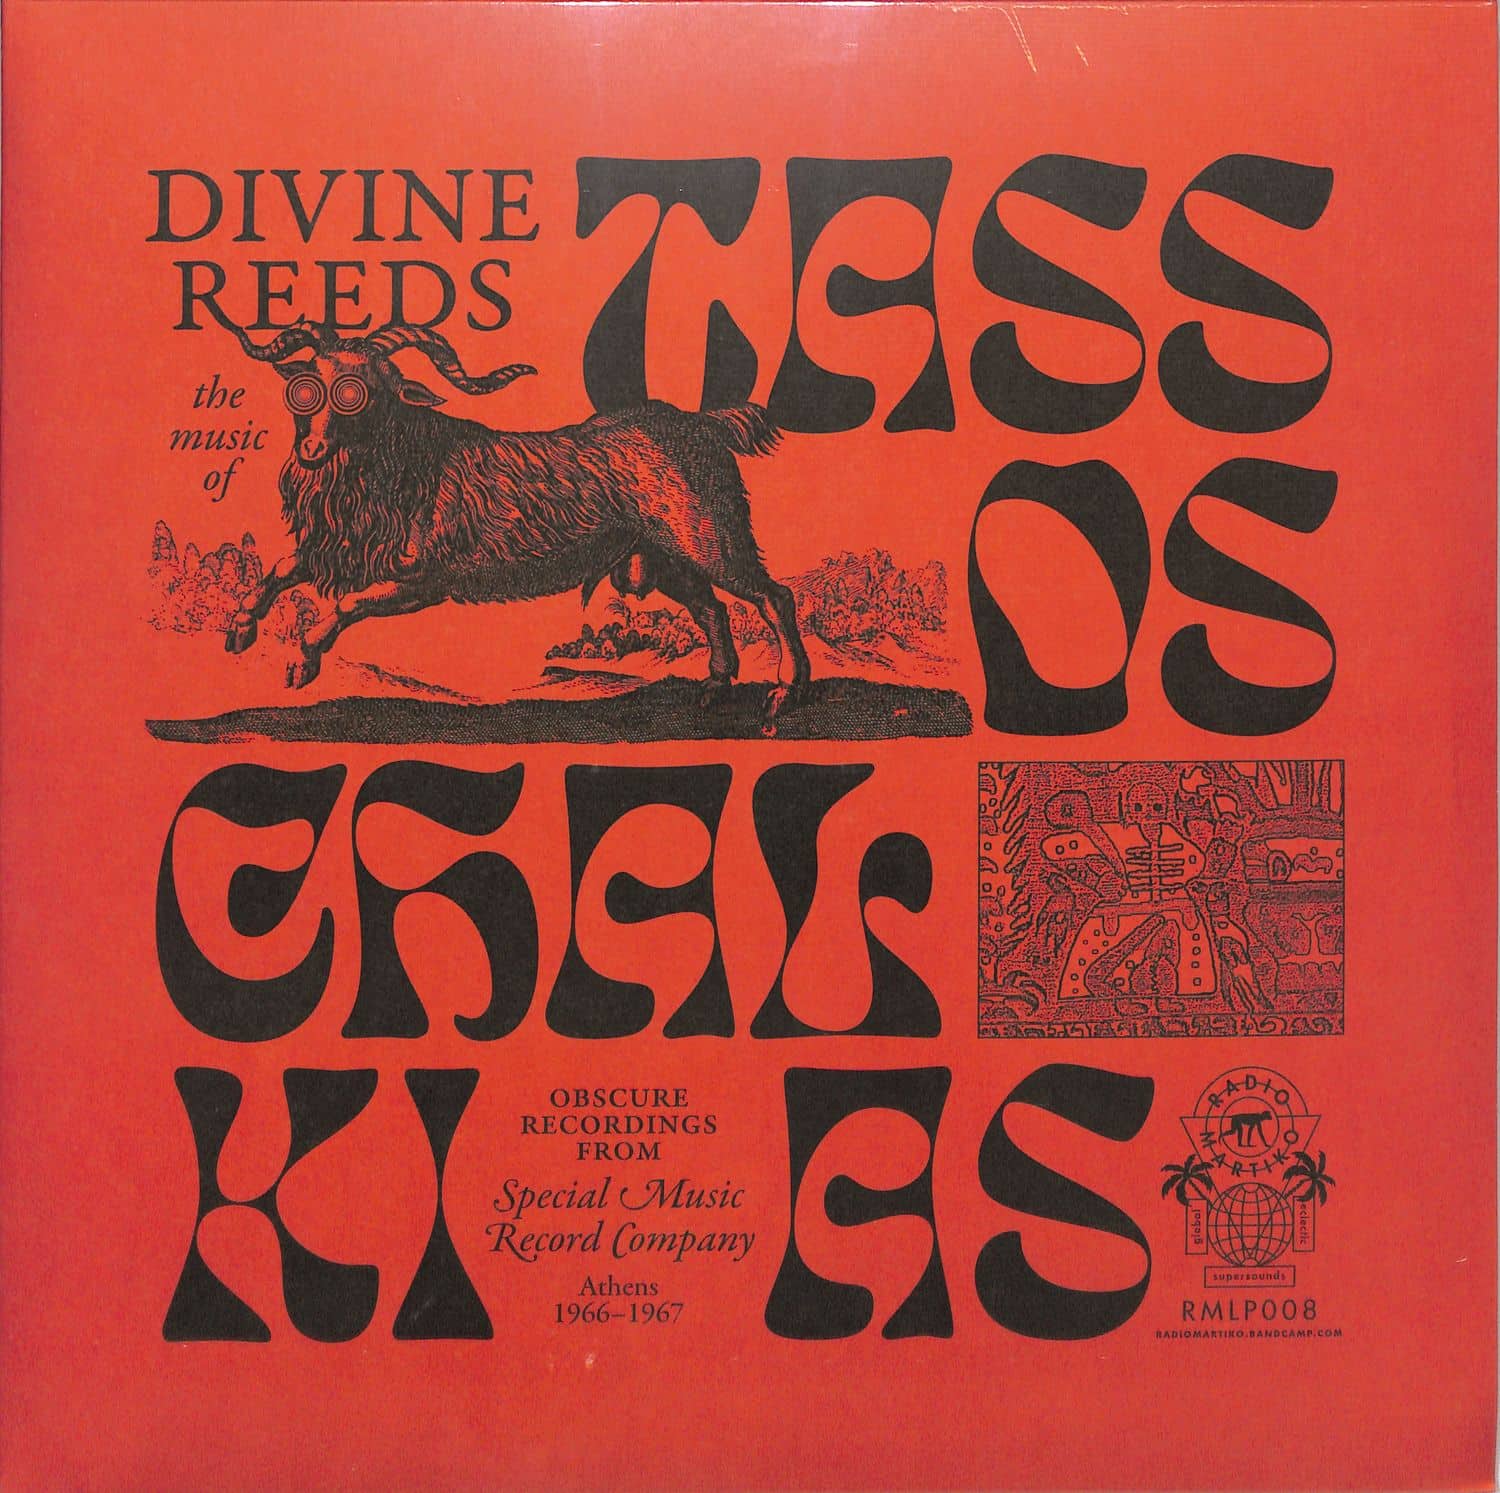 Tassos Chalkias - DIVINE REEDS / OBSCURE RECORDINGS FROM SPECIAL MUSIC RECORDING COMPANY 